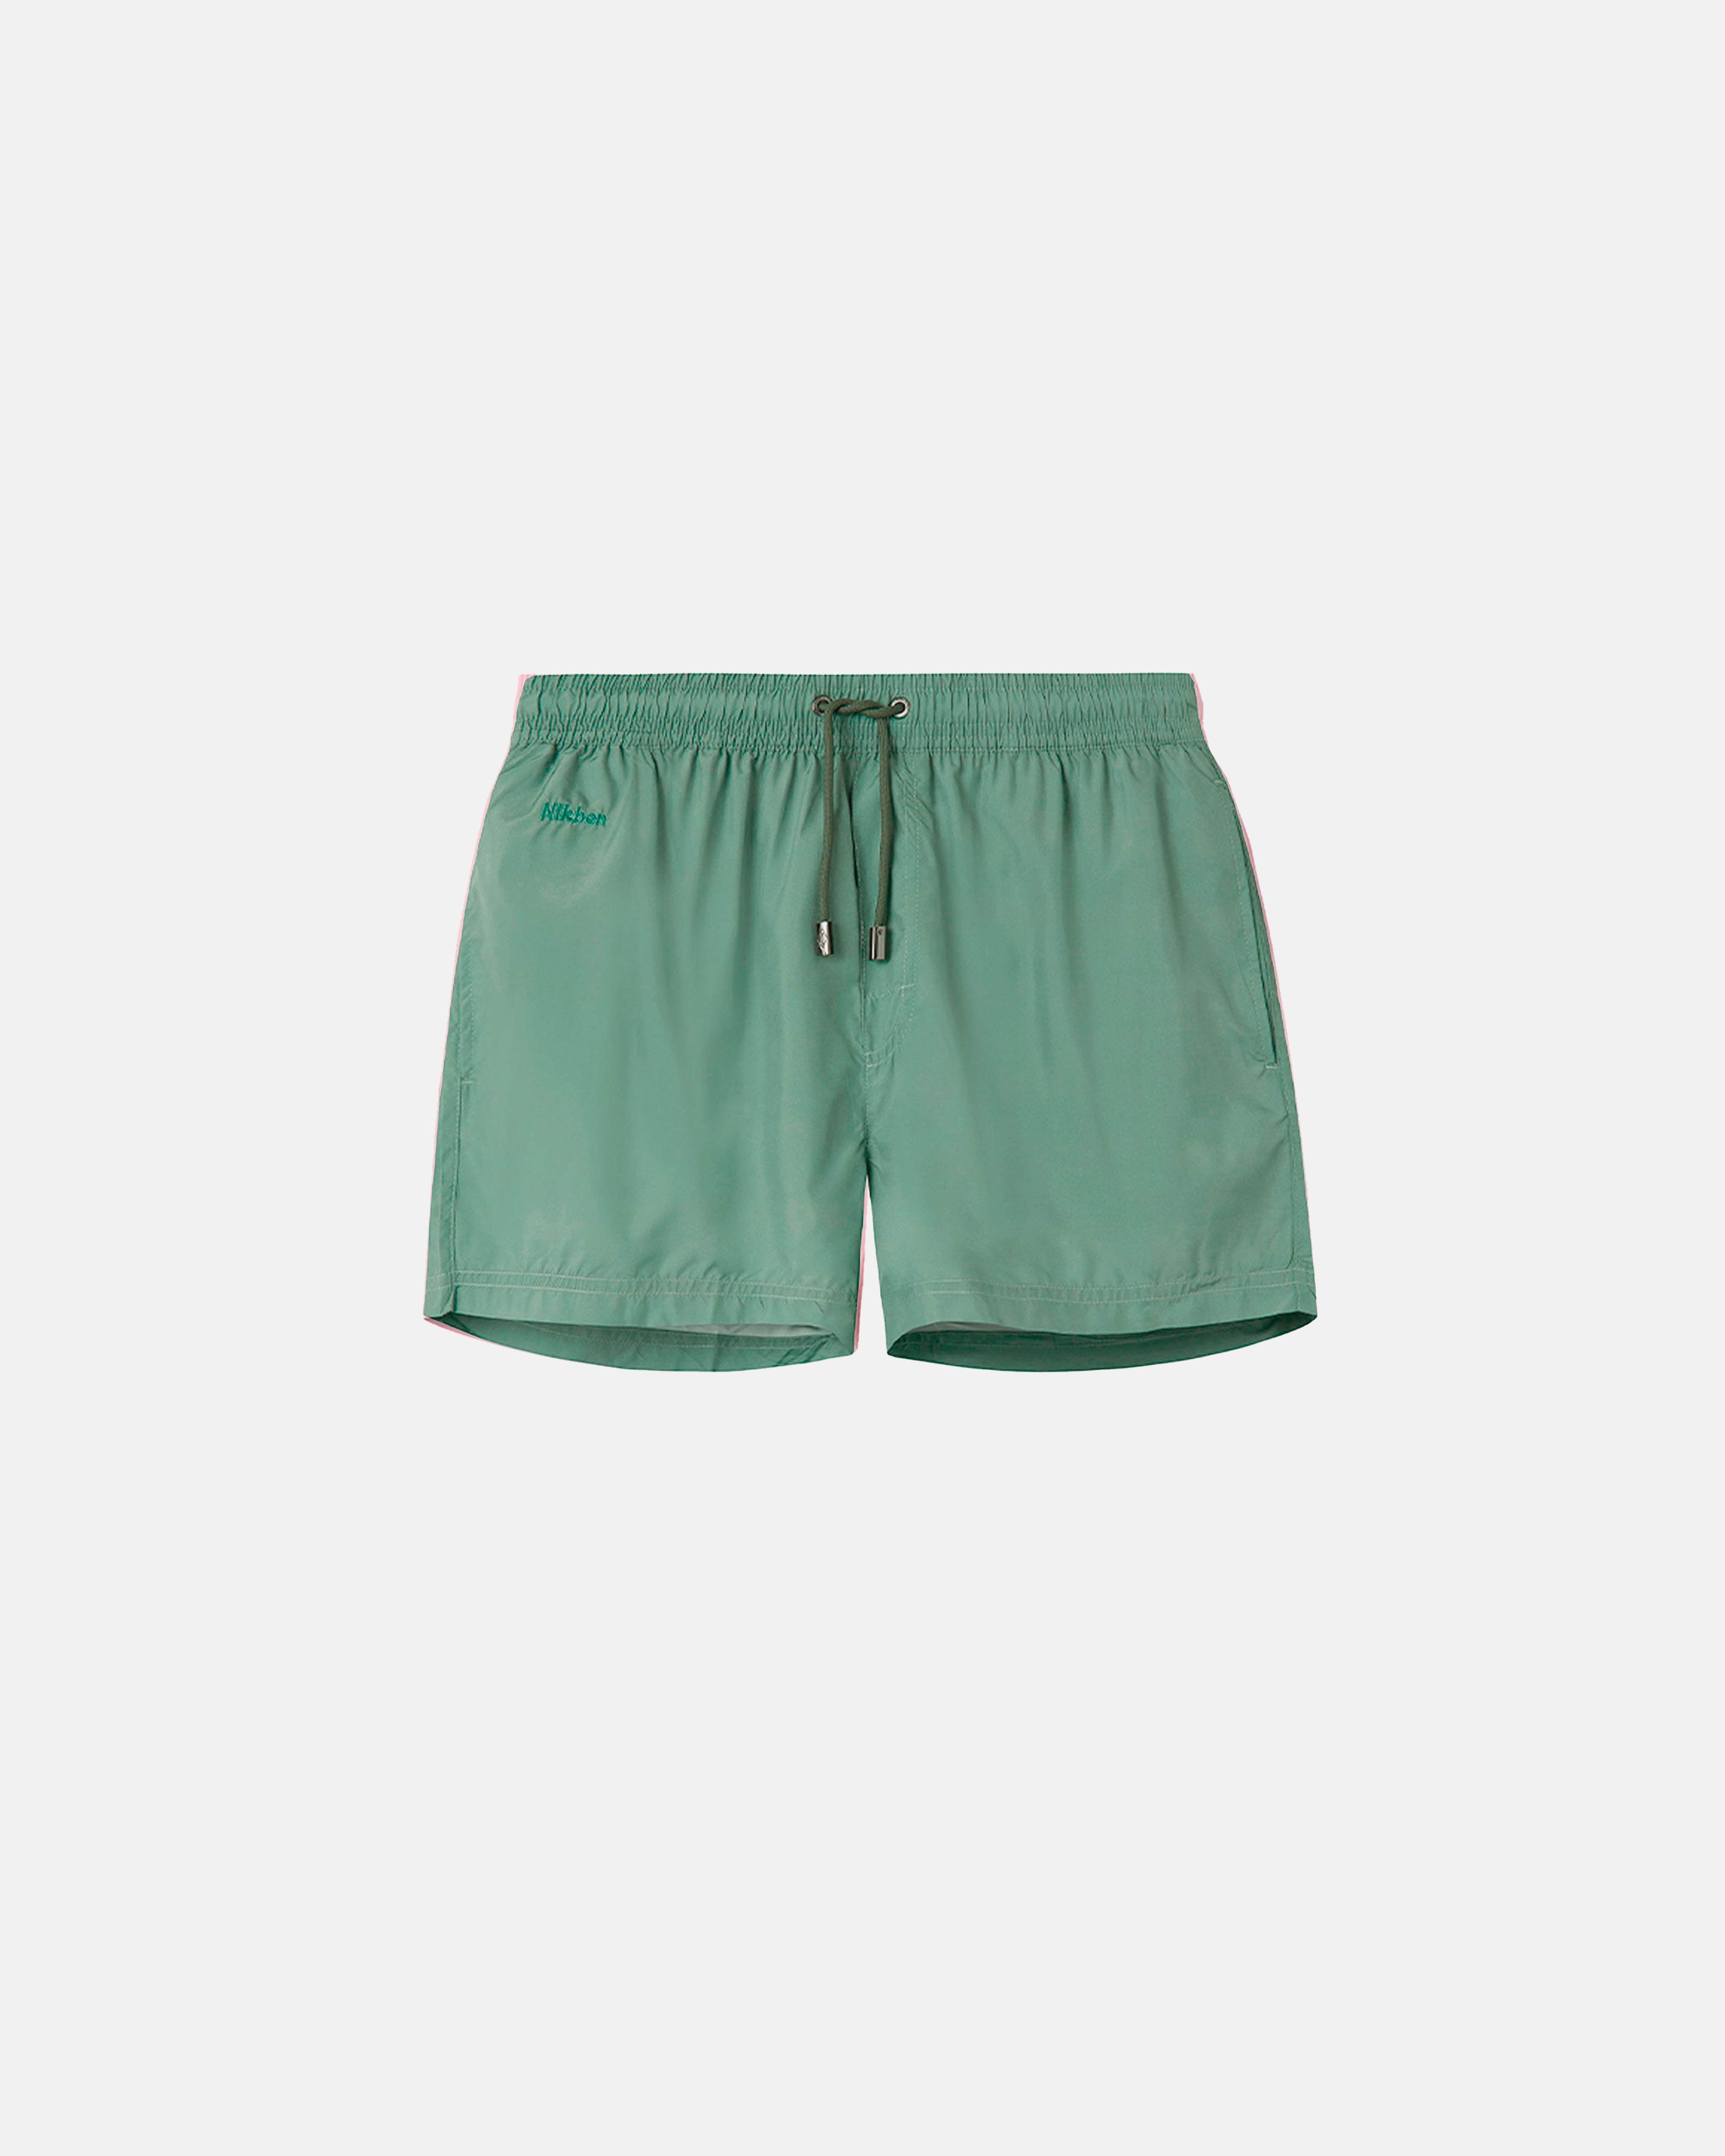 Green swim trunks. Mid length with drawstring and two side pockets.